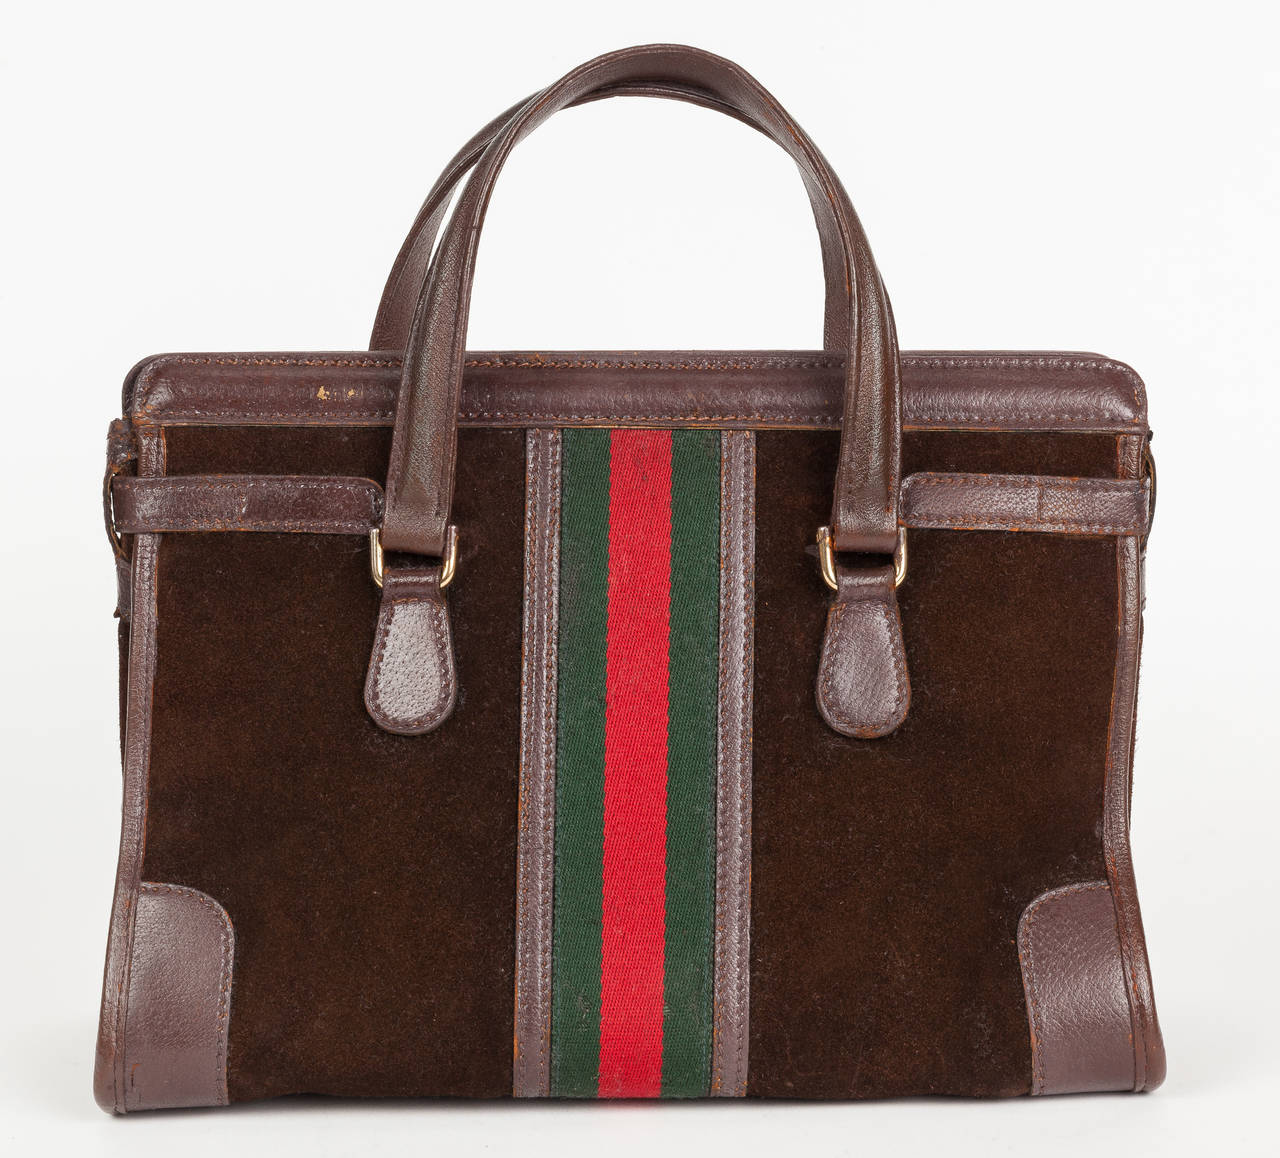 A rare 1970s Gucci brown suede open-top doctor's bag or tote with brown leather trim, gold hardware and the iconic Gucci green and red canvas racer stripe detail at center back and front. Features a wraparound brown leather strap, brass turnlock